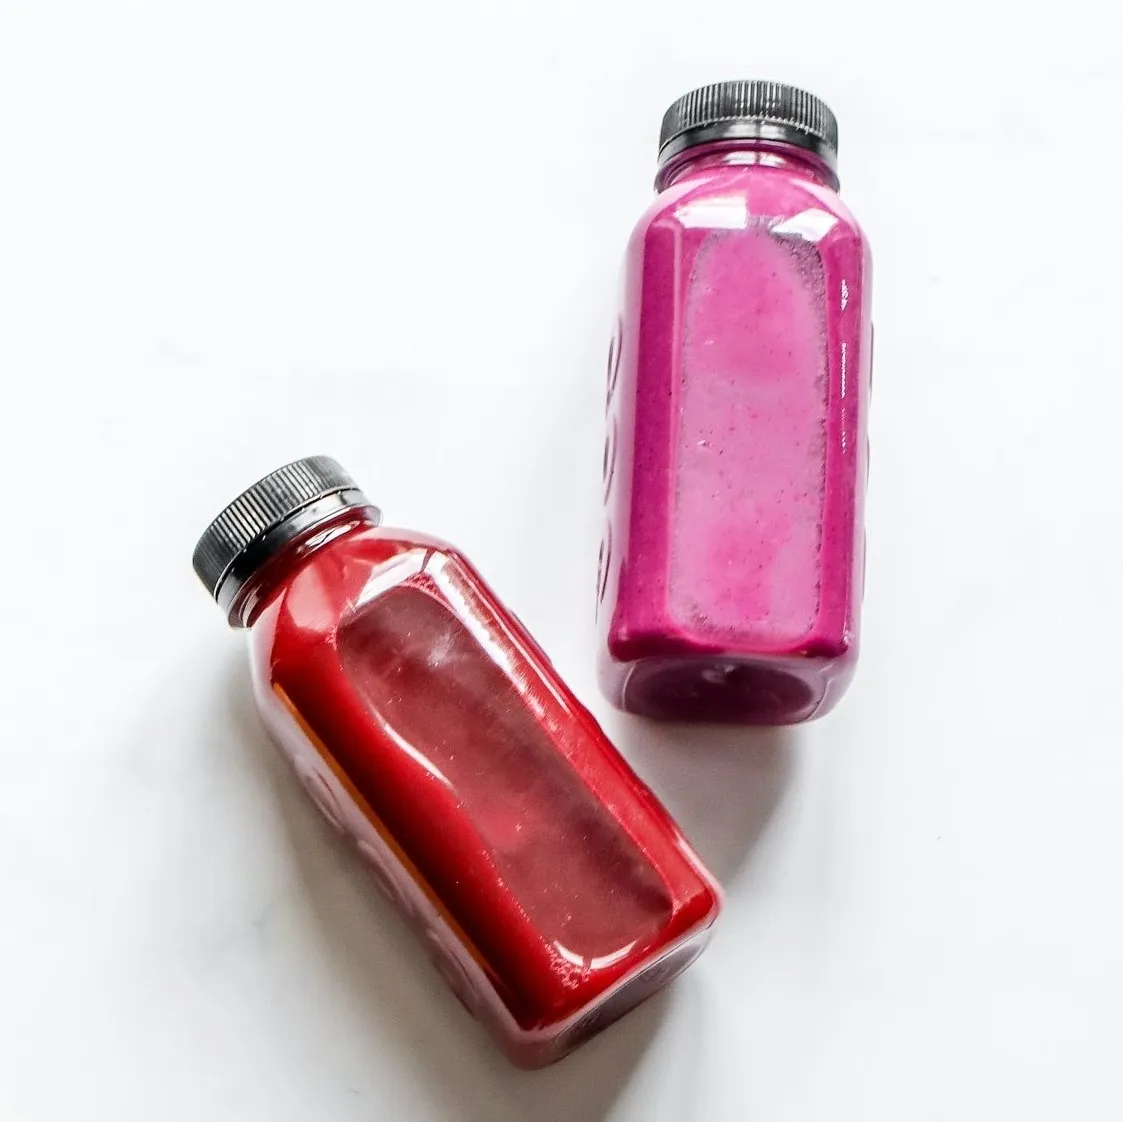 Two bottles with pink content on white surface